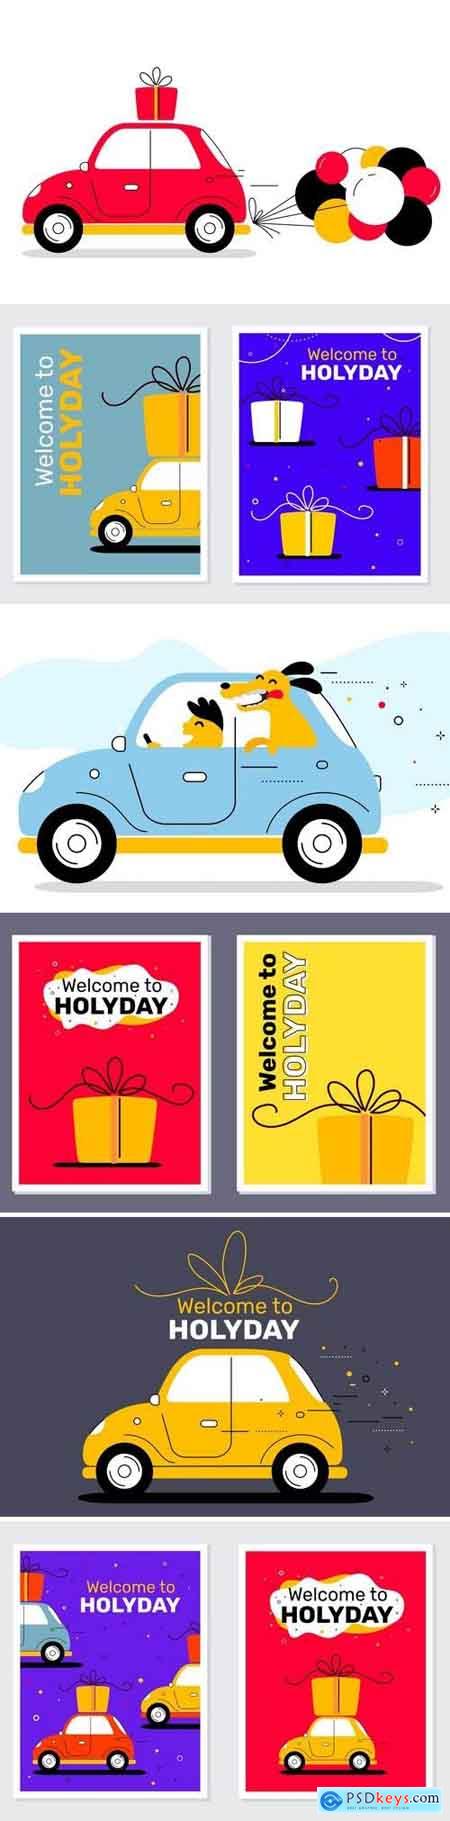 Vector collection with vintage holiday car